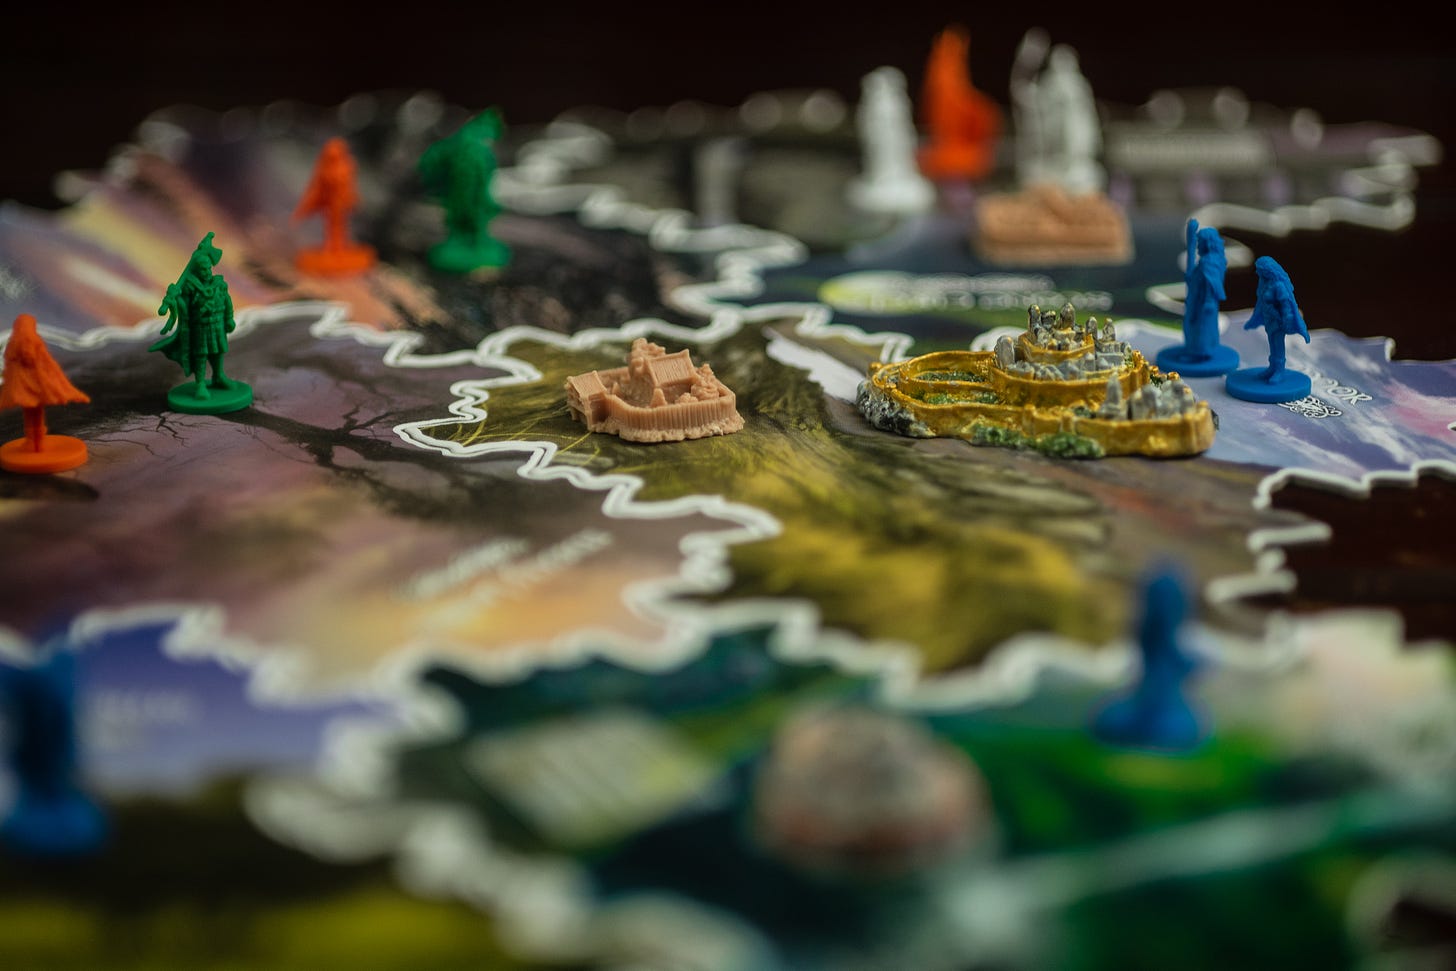 The board game Inis. There are figures representing different players, a citadel, and a sanctuary.